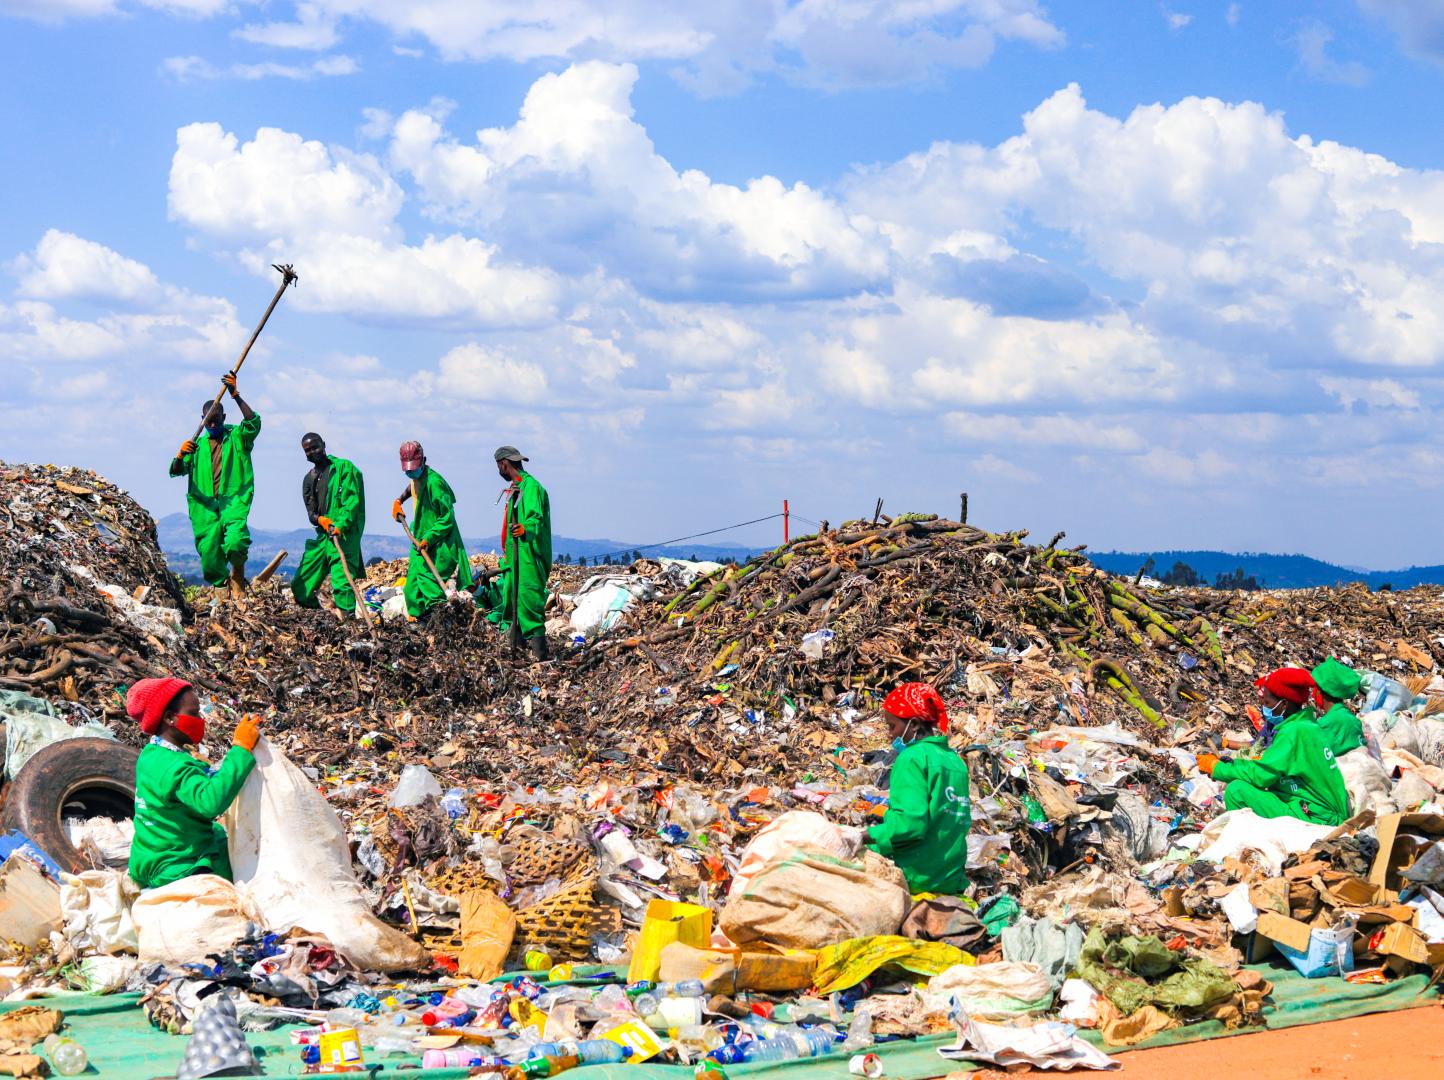 Efficiently tackling waste management together: a group of dedicated youth sorting, recycling, and disposing of waste responsibly at Green Care Rwanda Ltd, ensuring a cleaner and greener Huye.